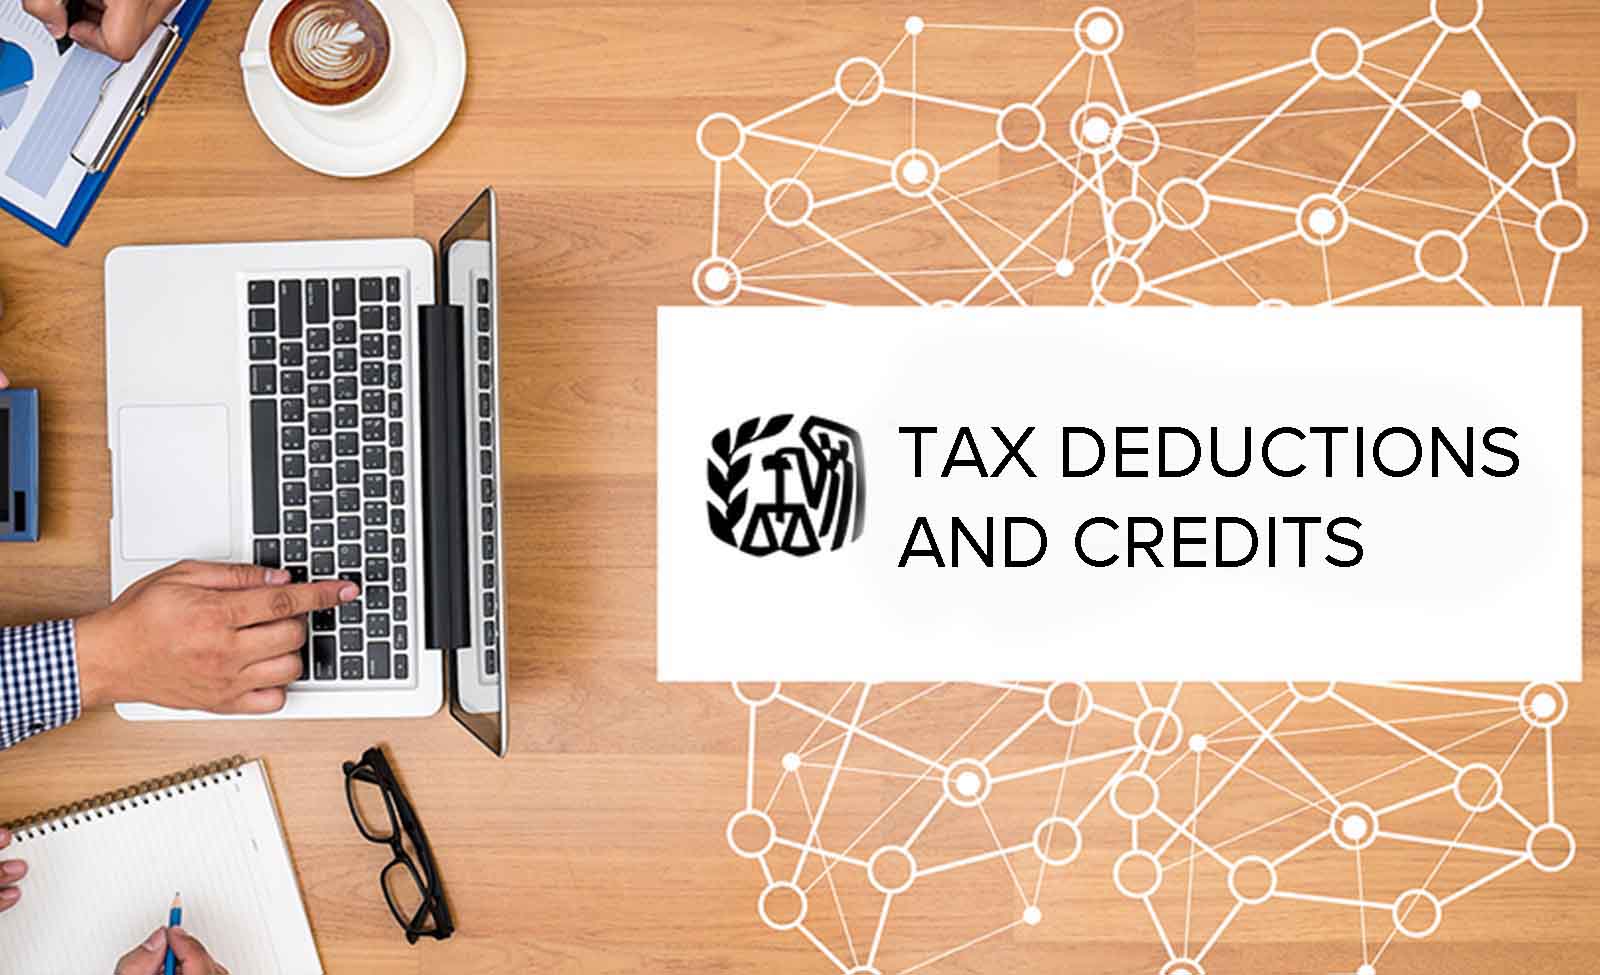 ULTIMATE LIST OF TAX DEDUCTIONS AND CREDITS